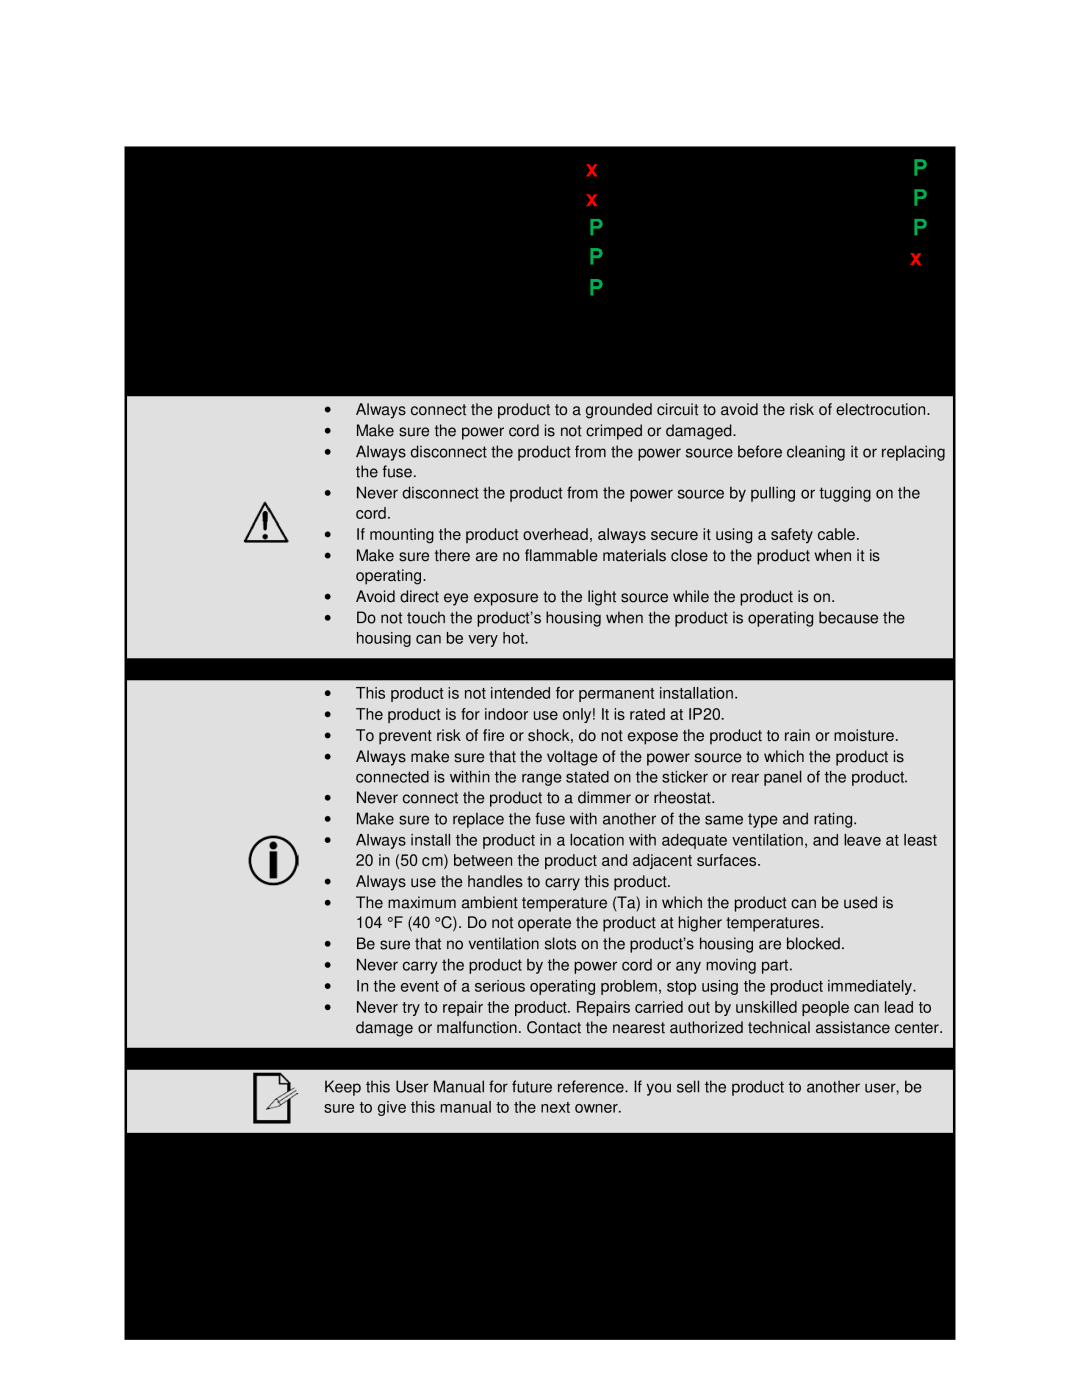 Chauvet 250irc user manual Product at a Glance, Safety Notes, P P P 